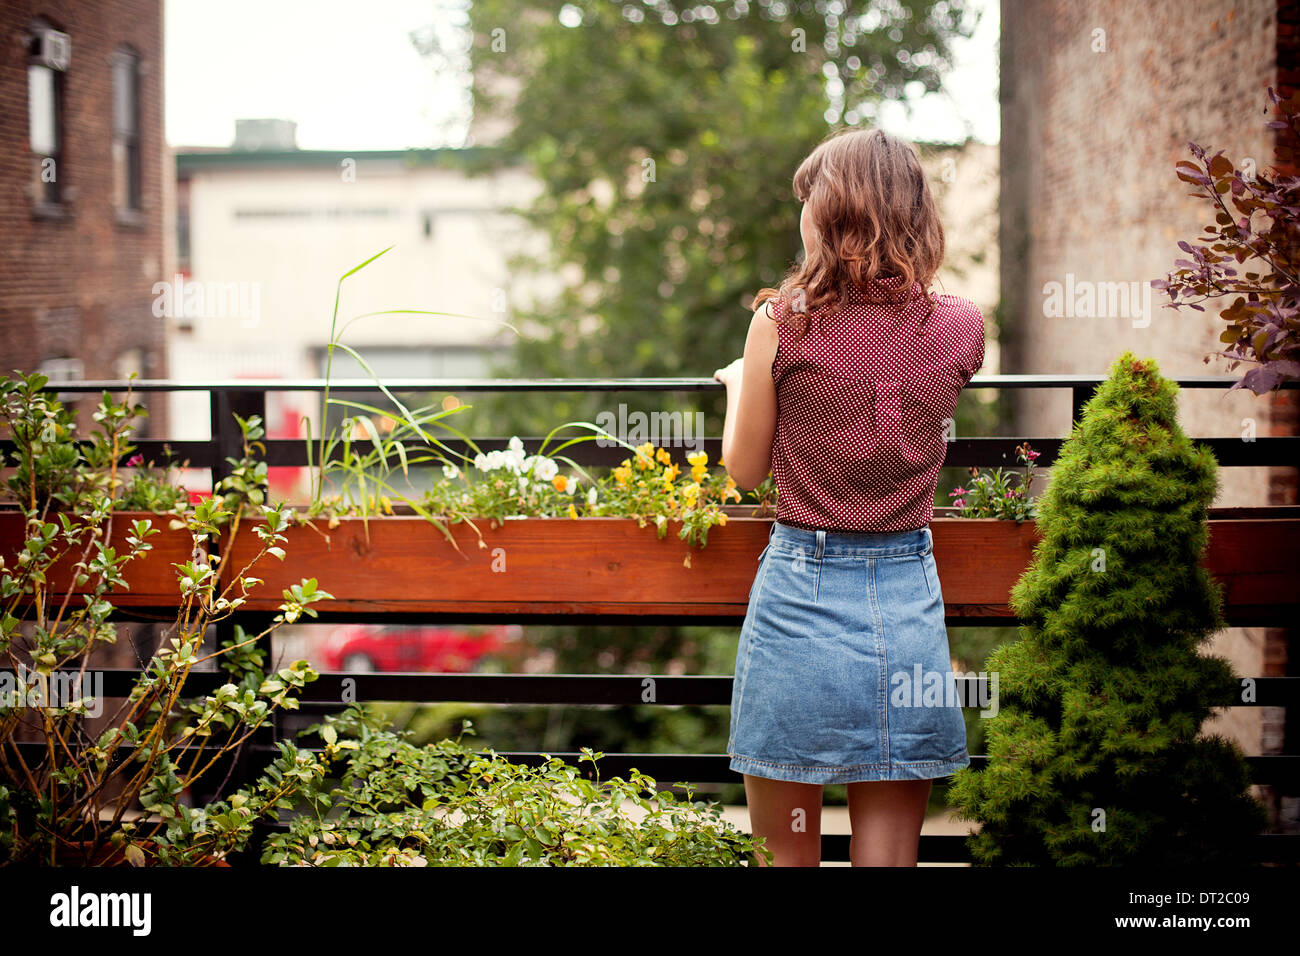 Rear view of young woman wearing denim skirt Stock Photo